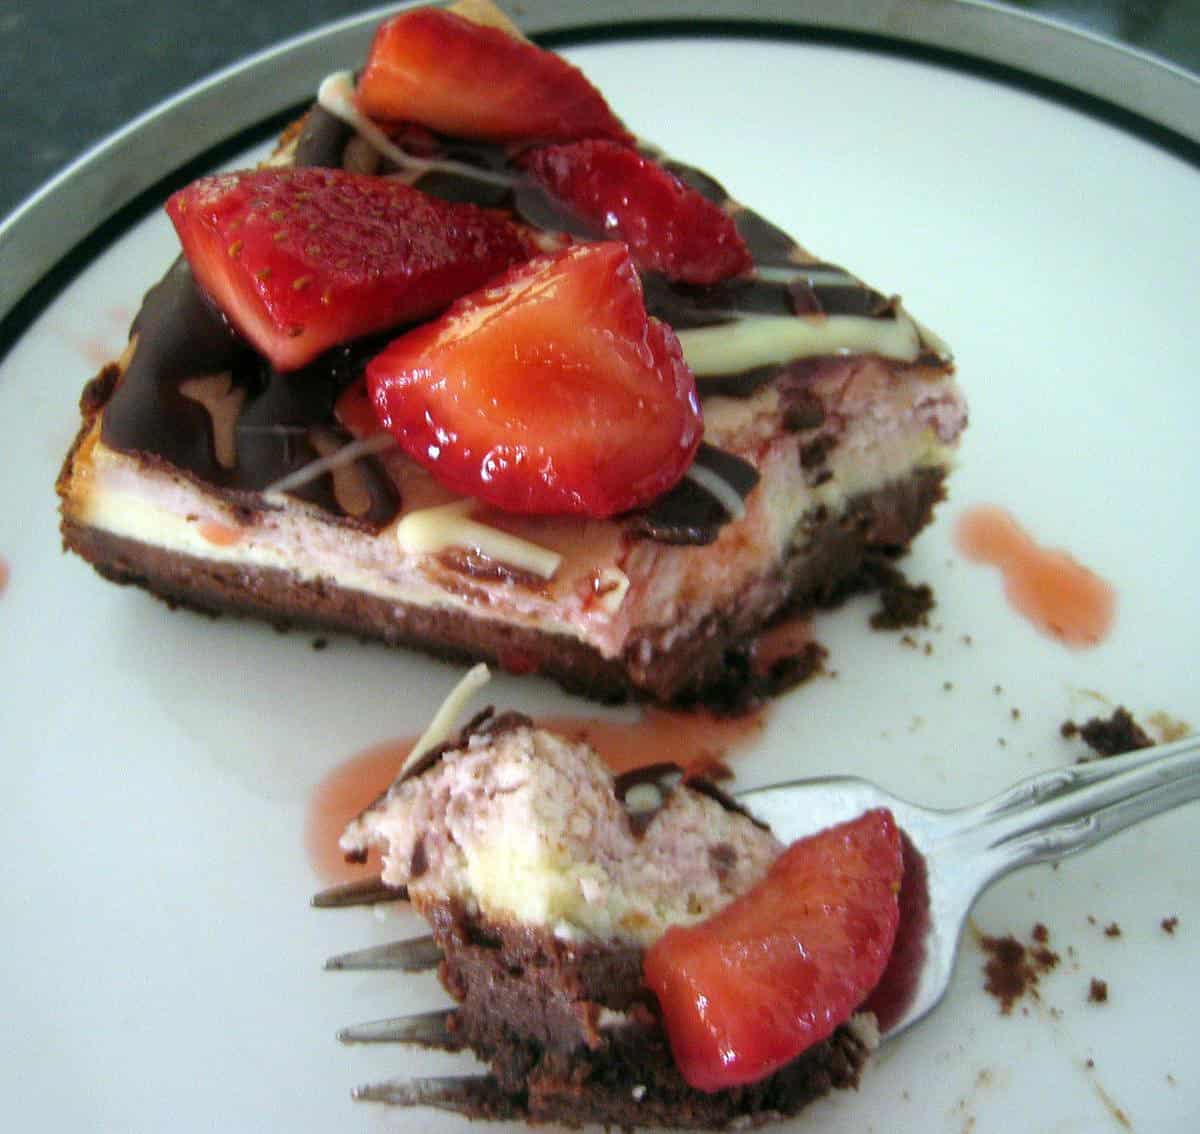  A beautiful mix of vanilla, chocolate, and strawberry in every slice.